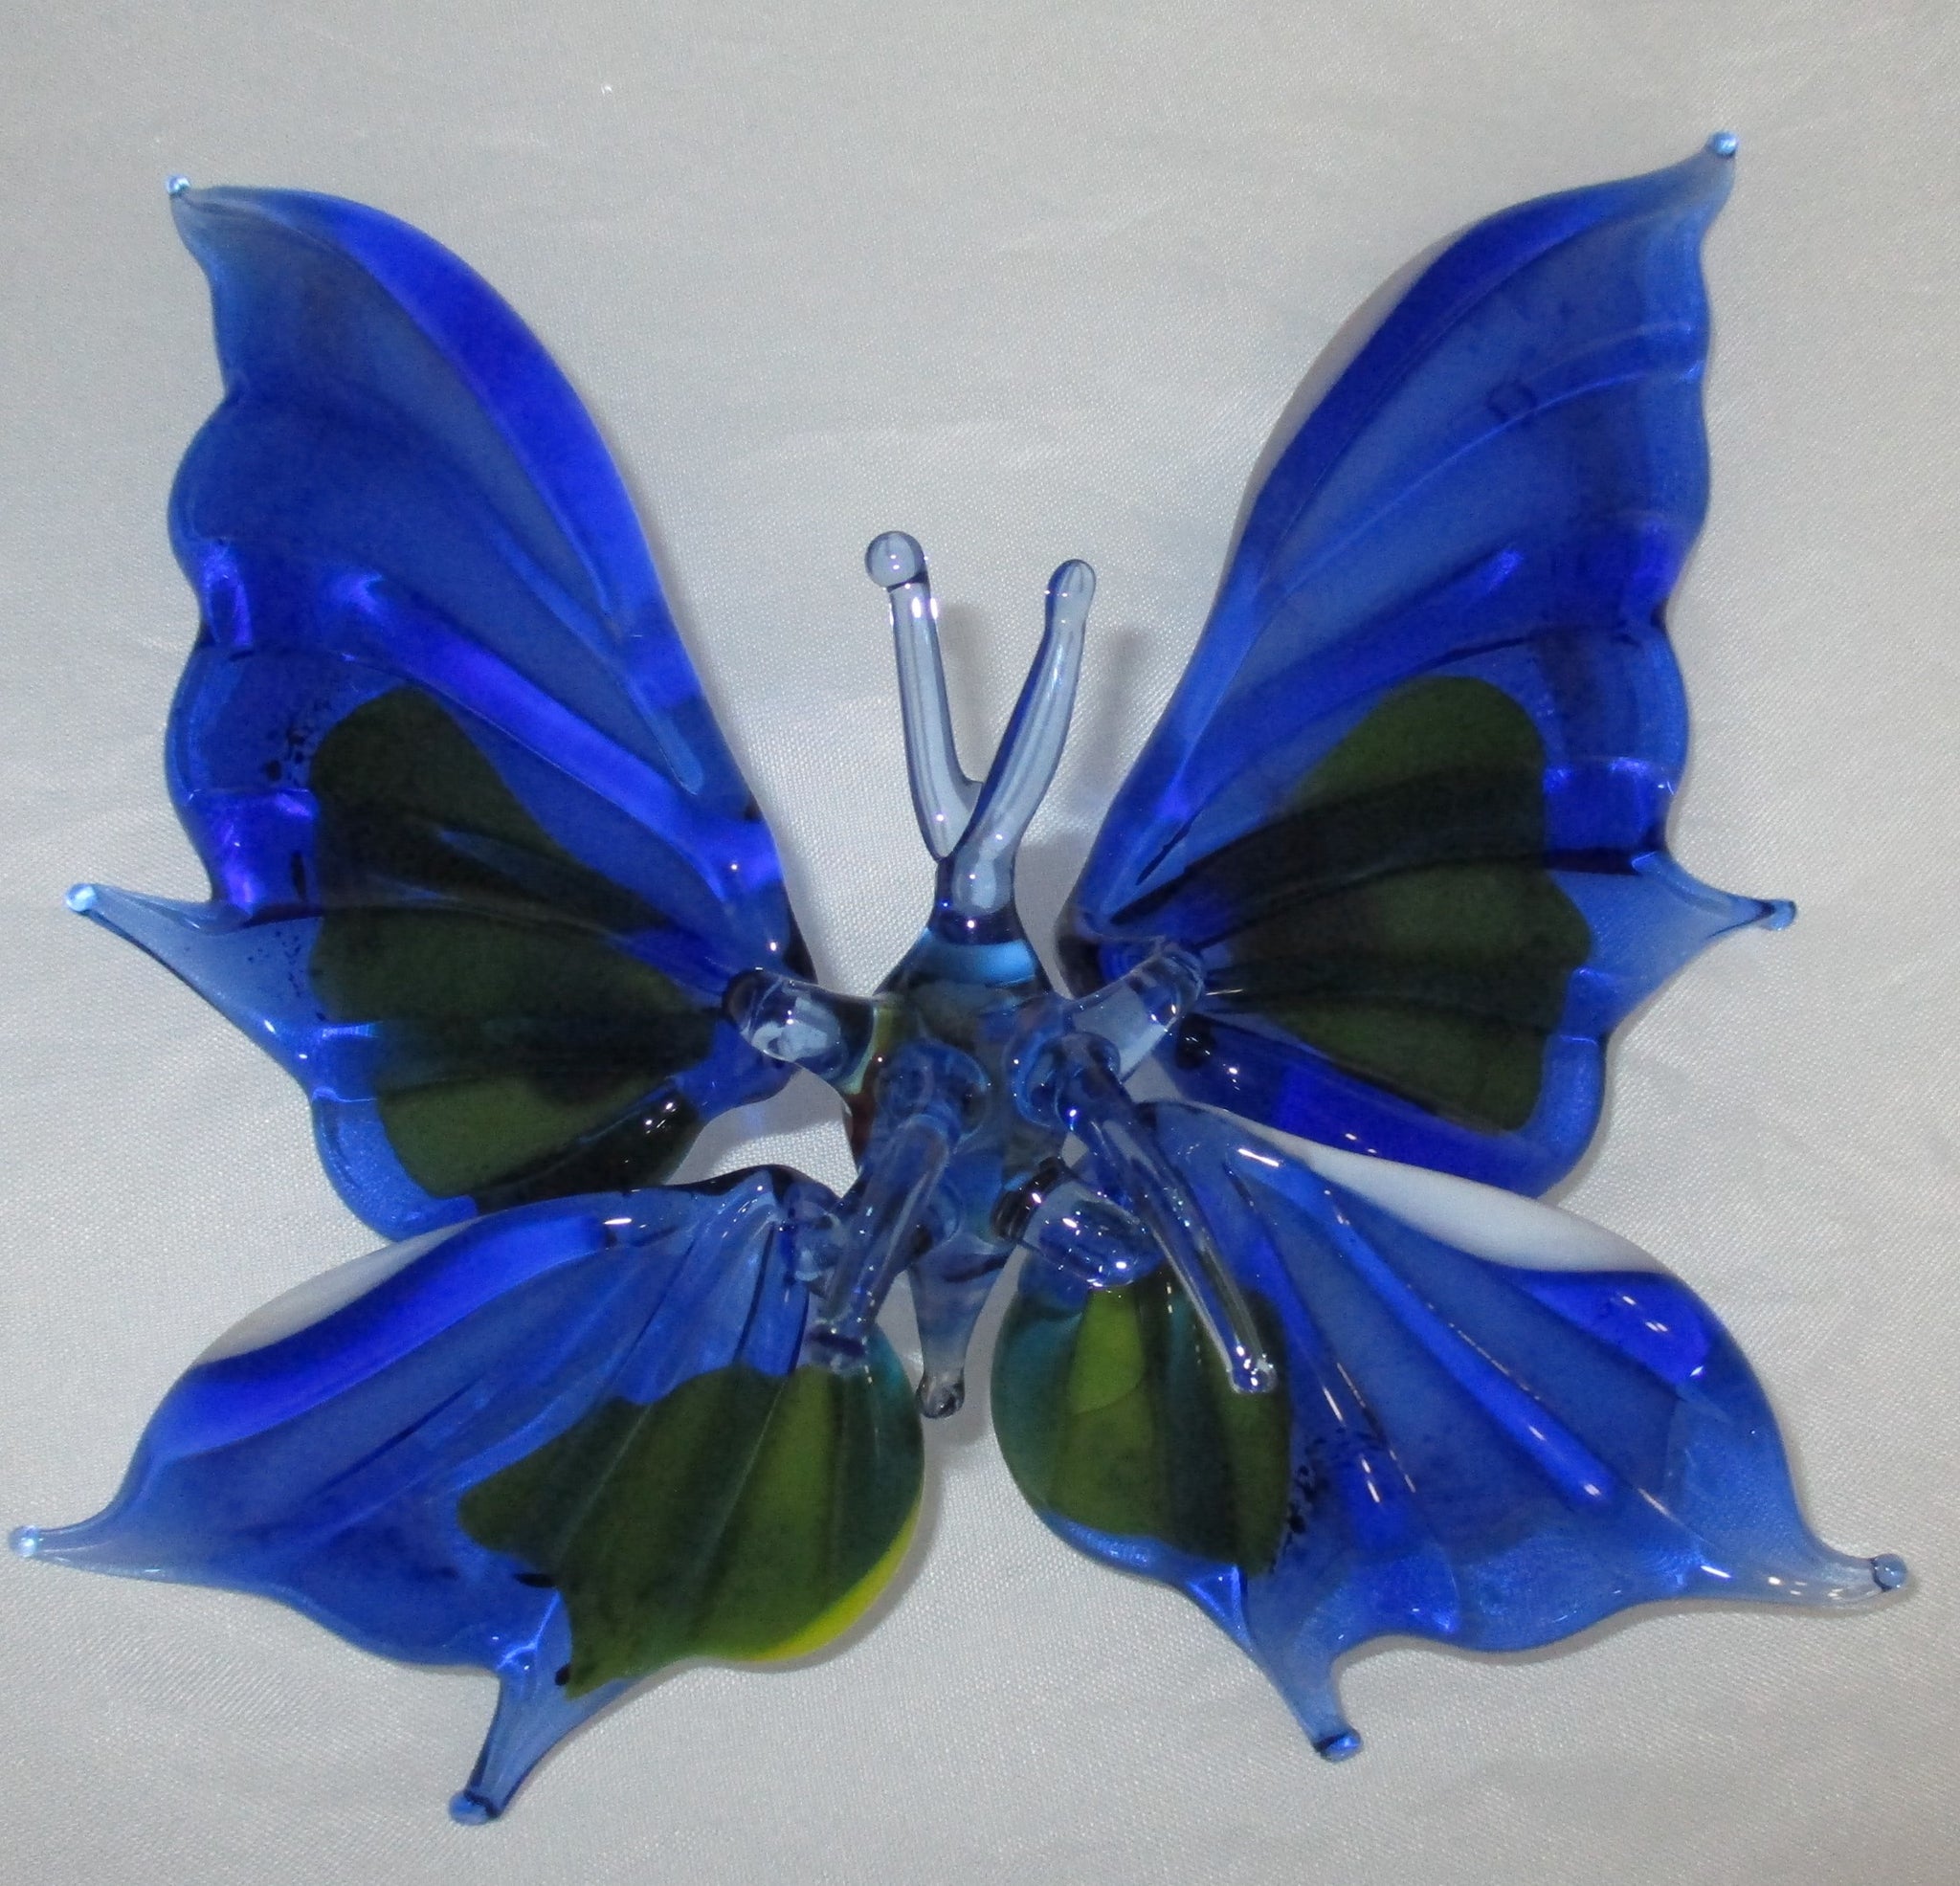 Butterfly on Glass Ball - 30x40cm (12x16in) / Square